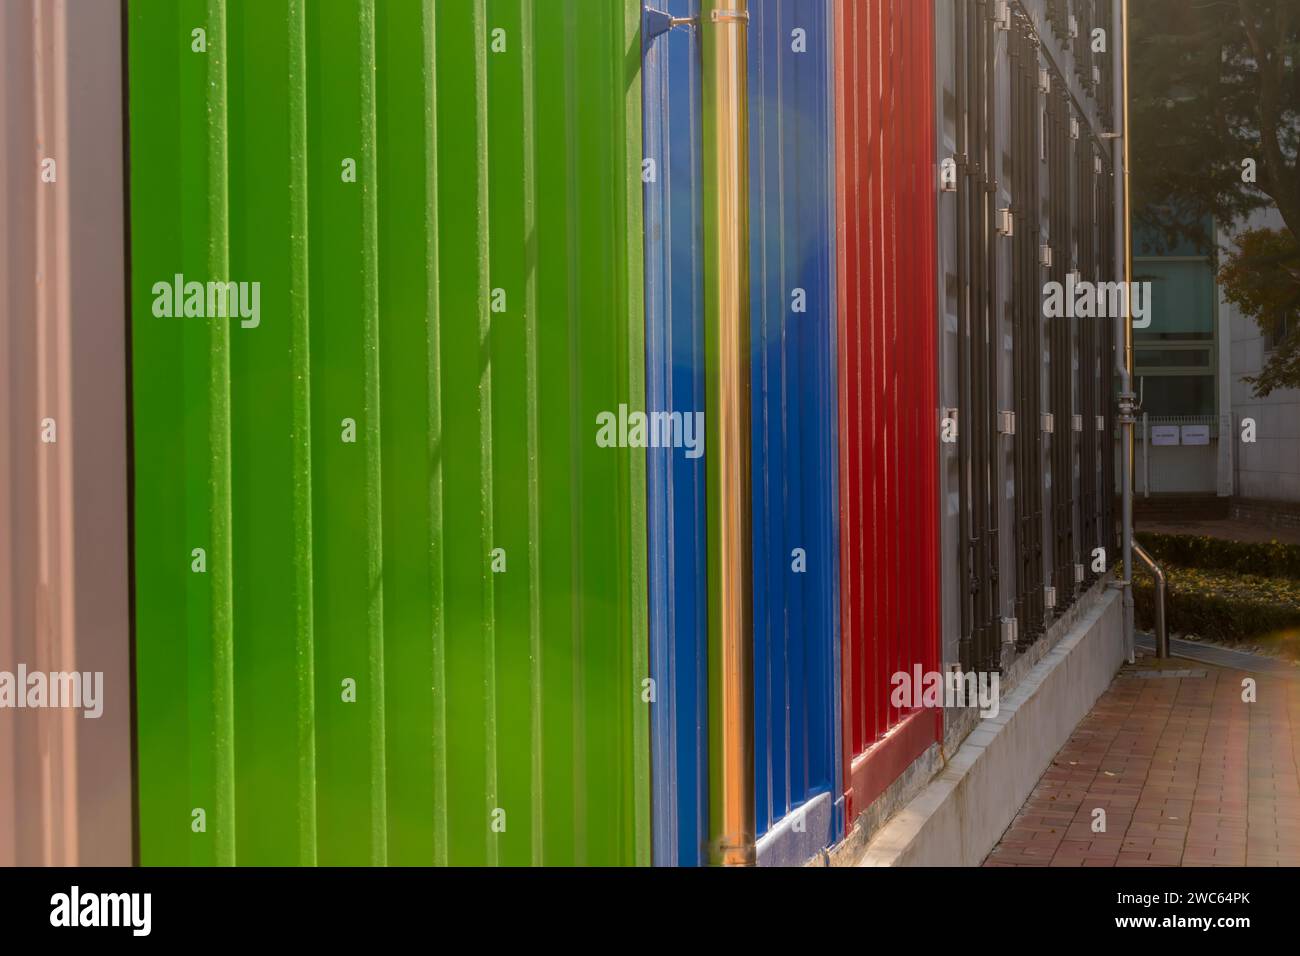 Exterior wall of building built to resemble metal shipping containers Stock Photo